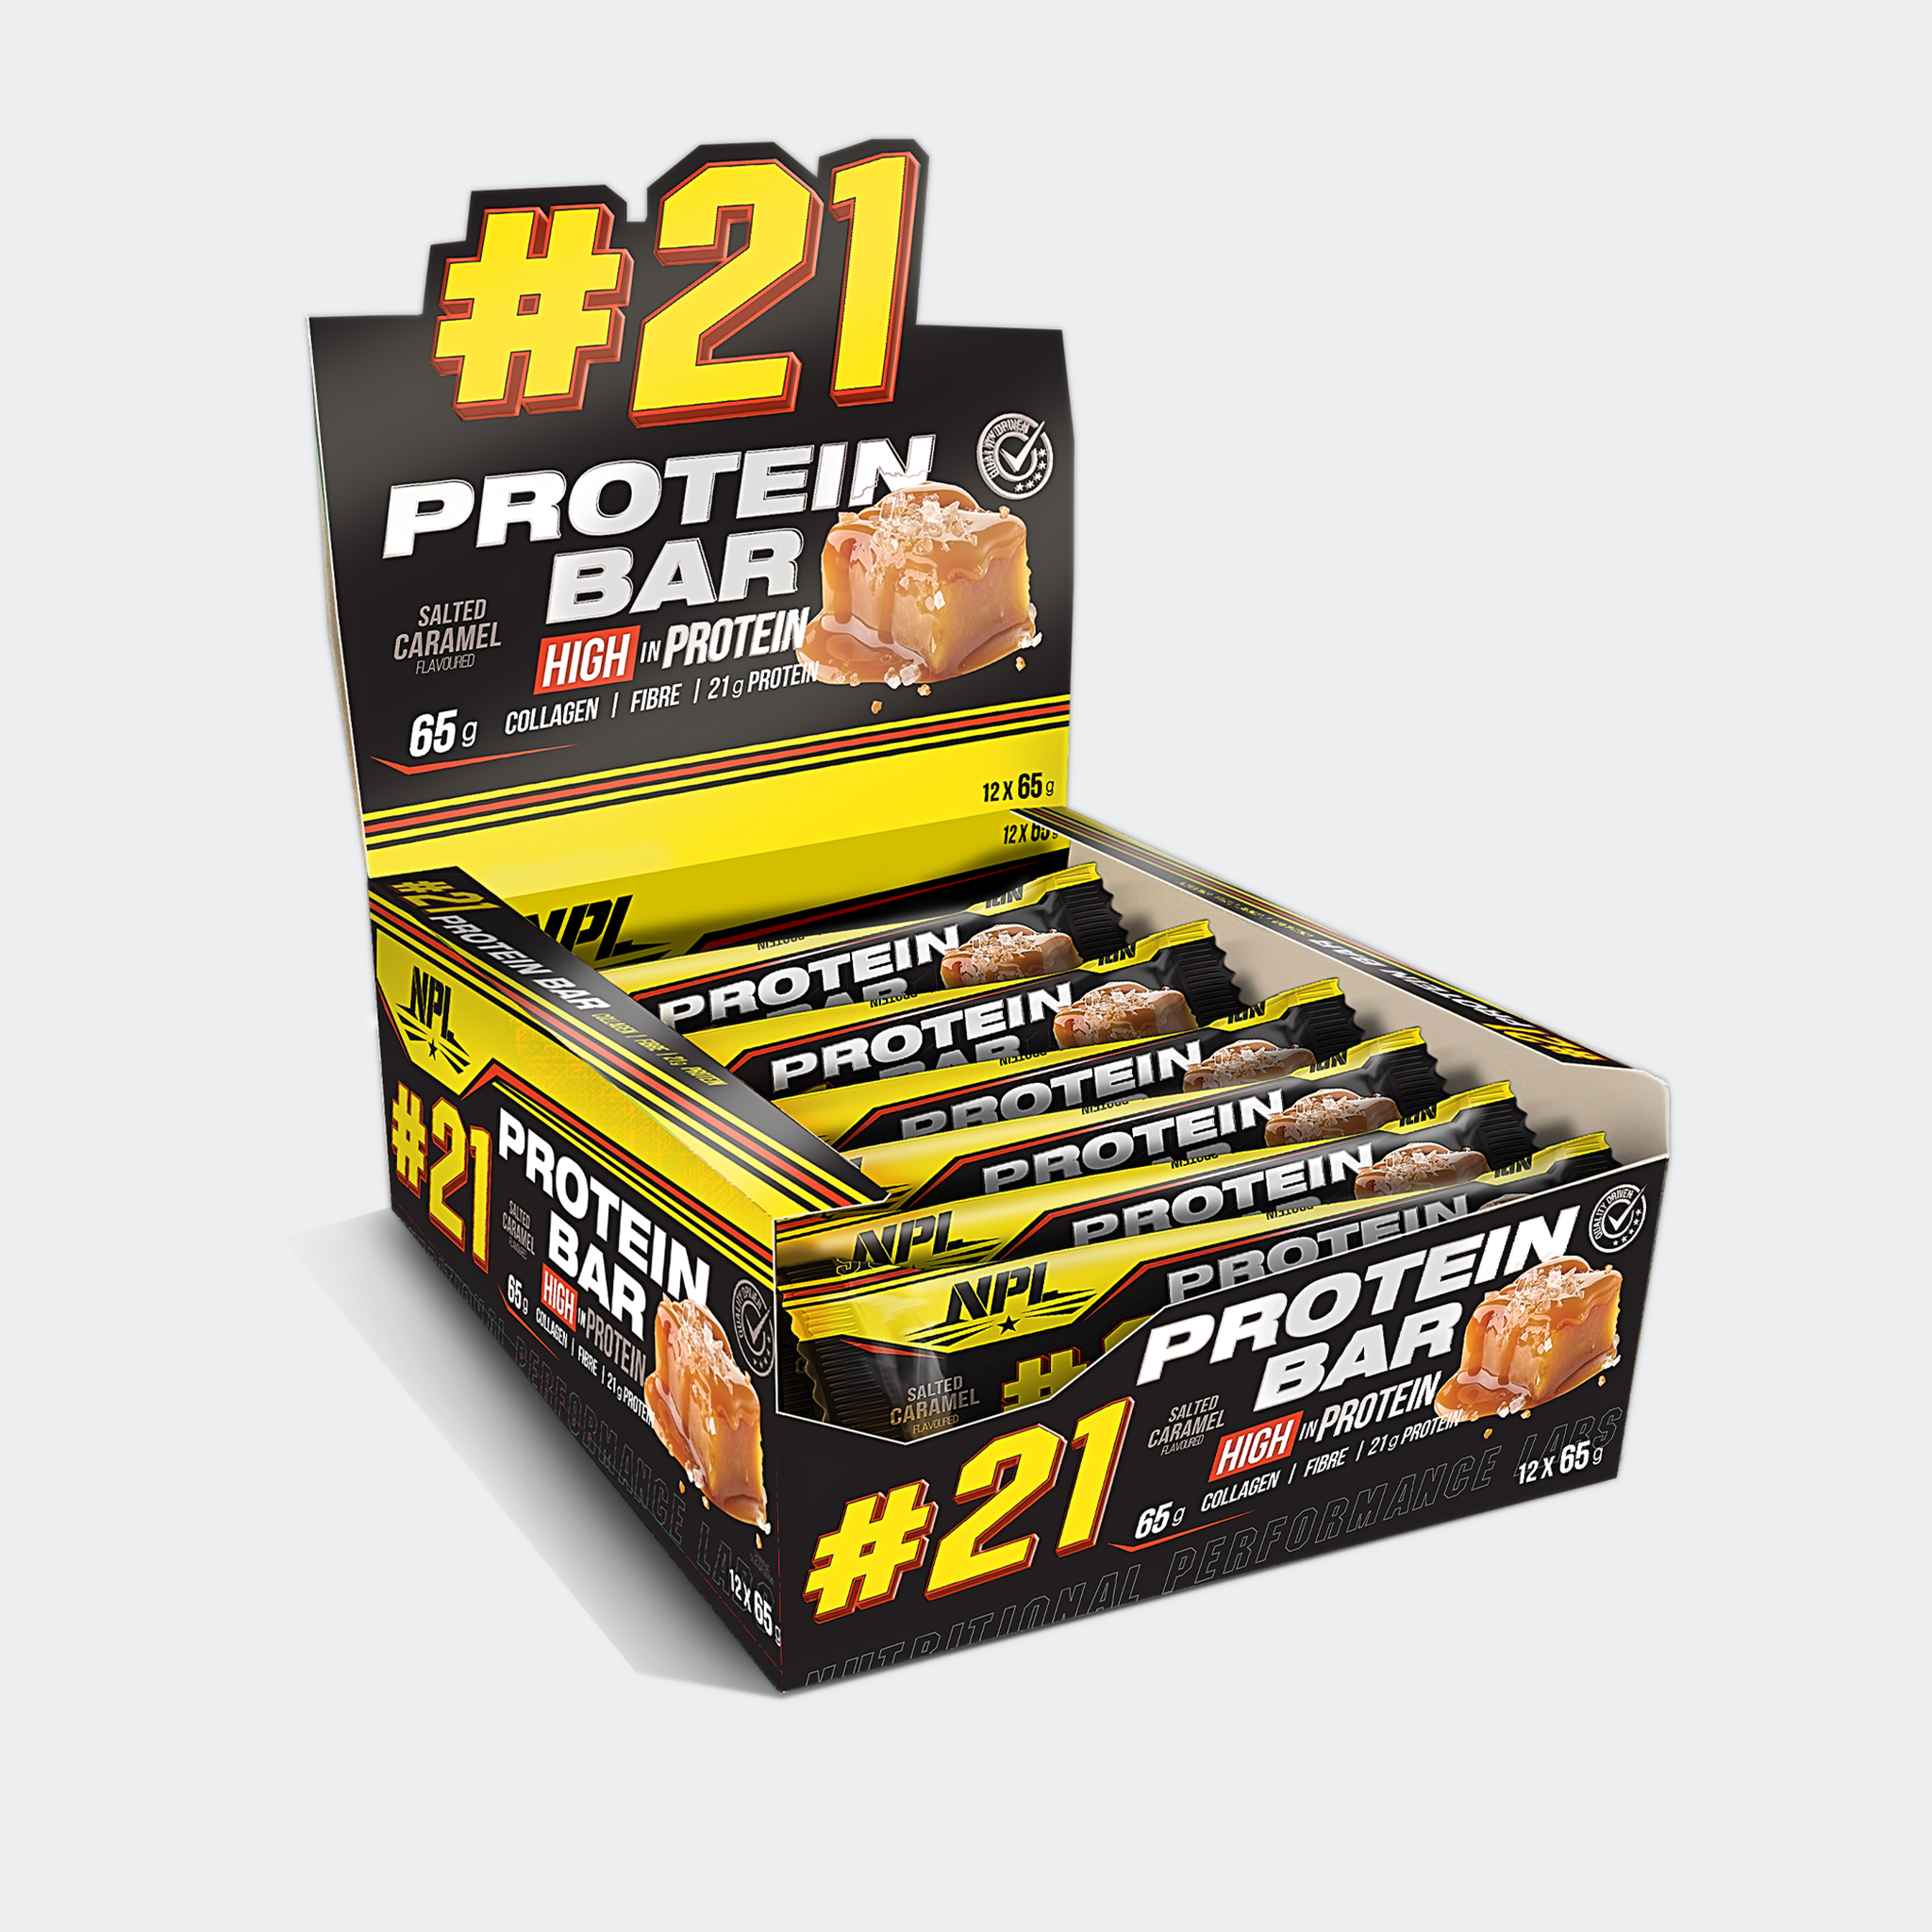 NPL protein bars #21 Protein bars high in protein while low in calories